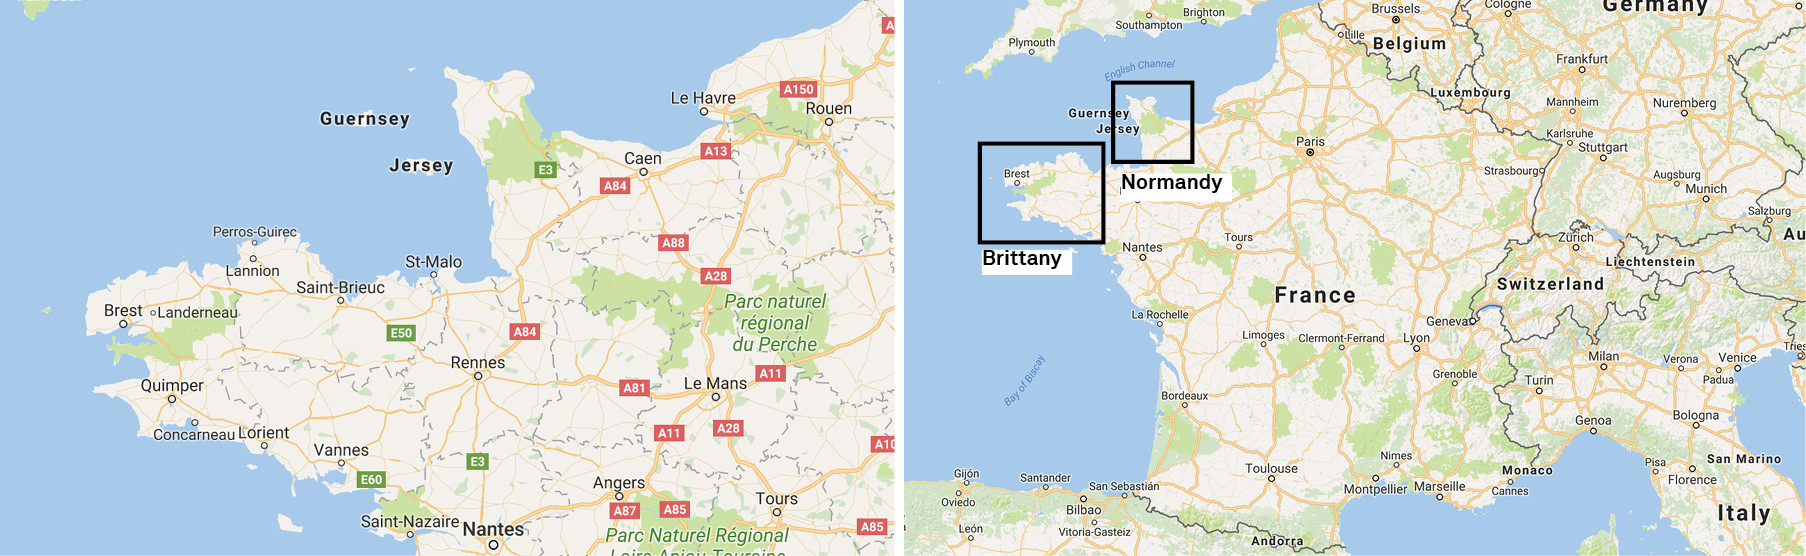 Map-Brittany-Normandy